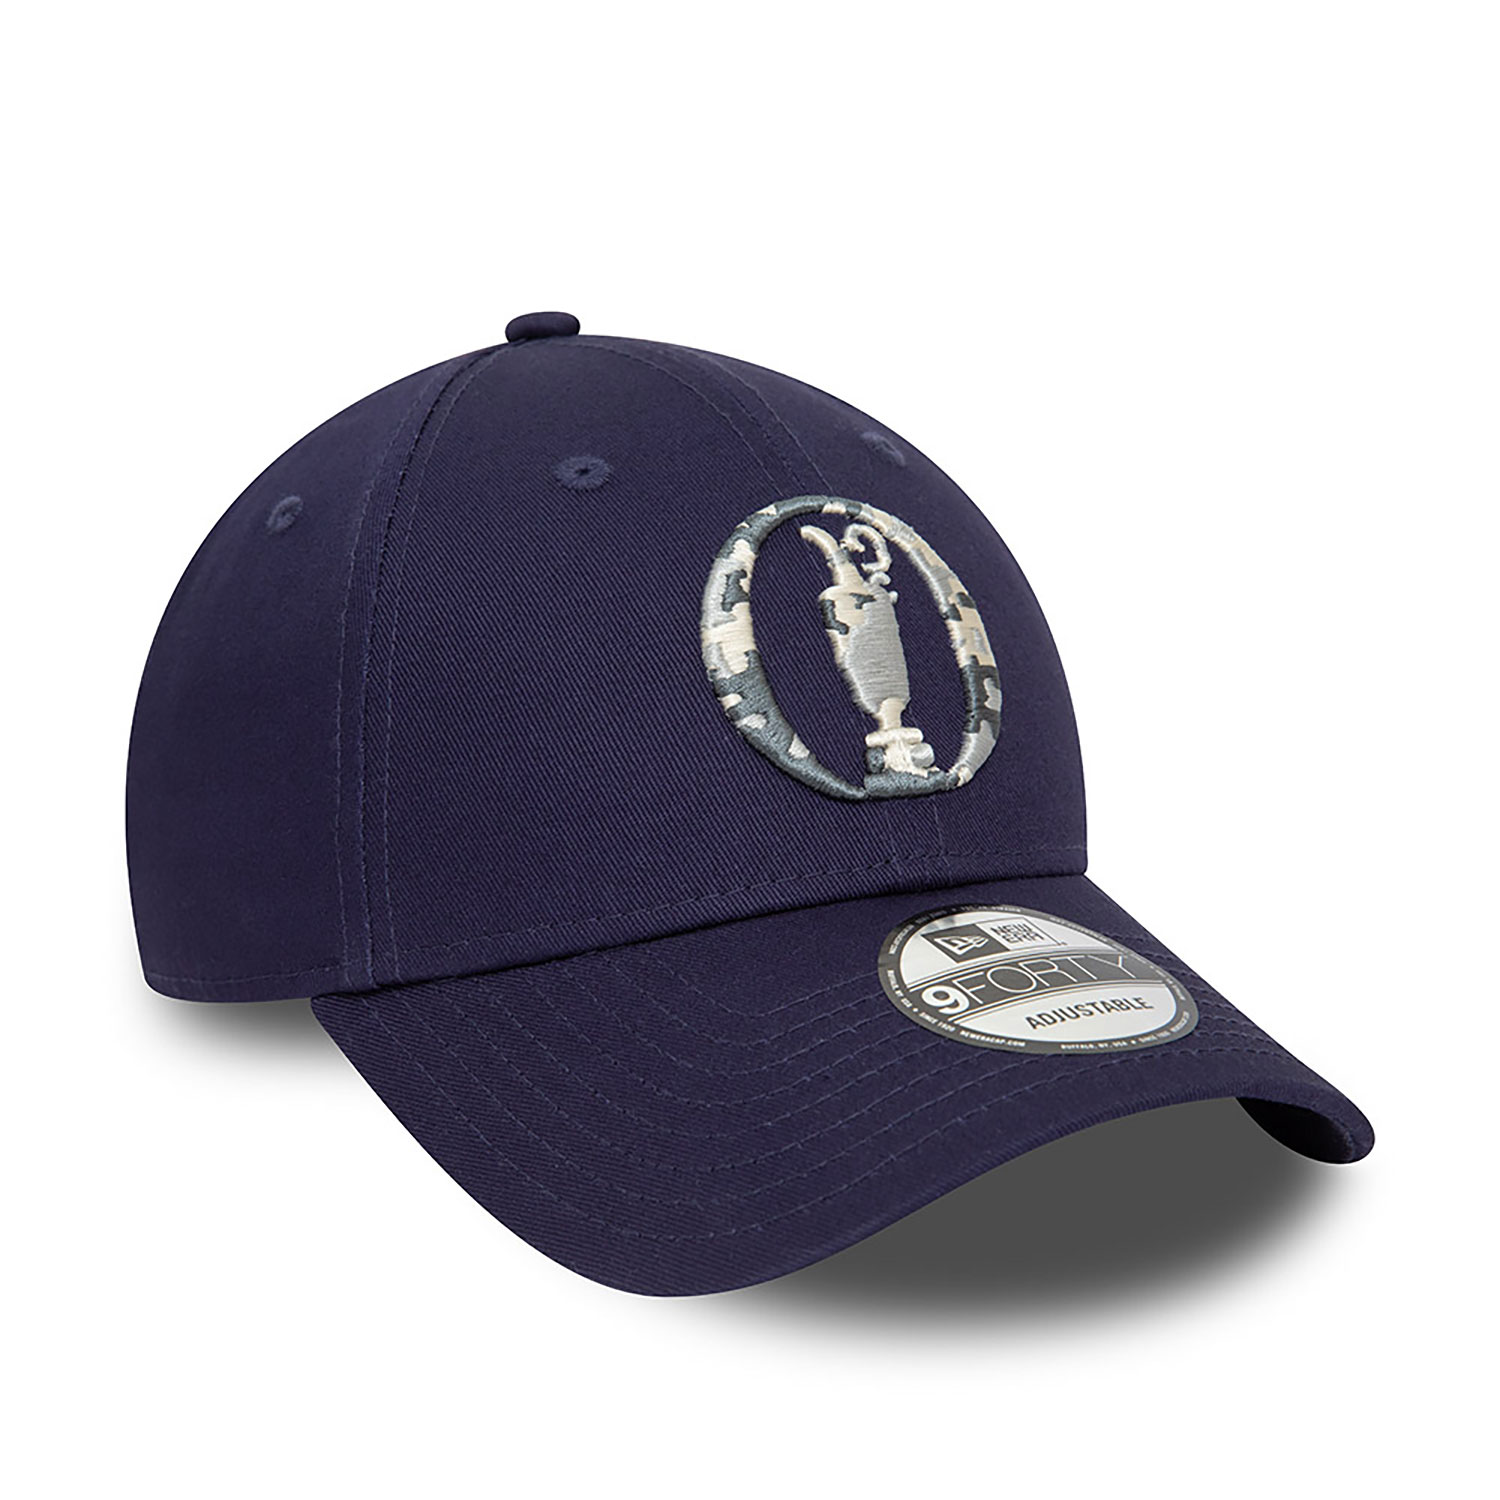 The Open Championship Camo Infill Navy 9FORTY Adjustable Cap